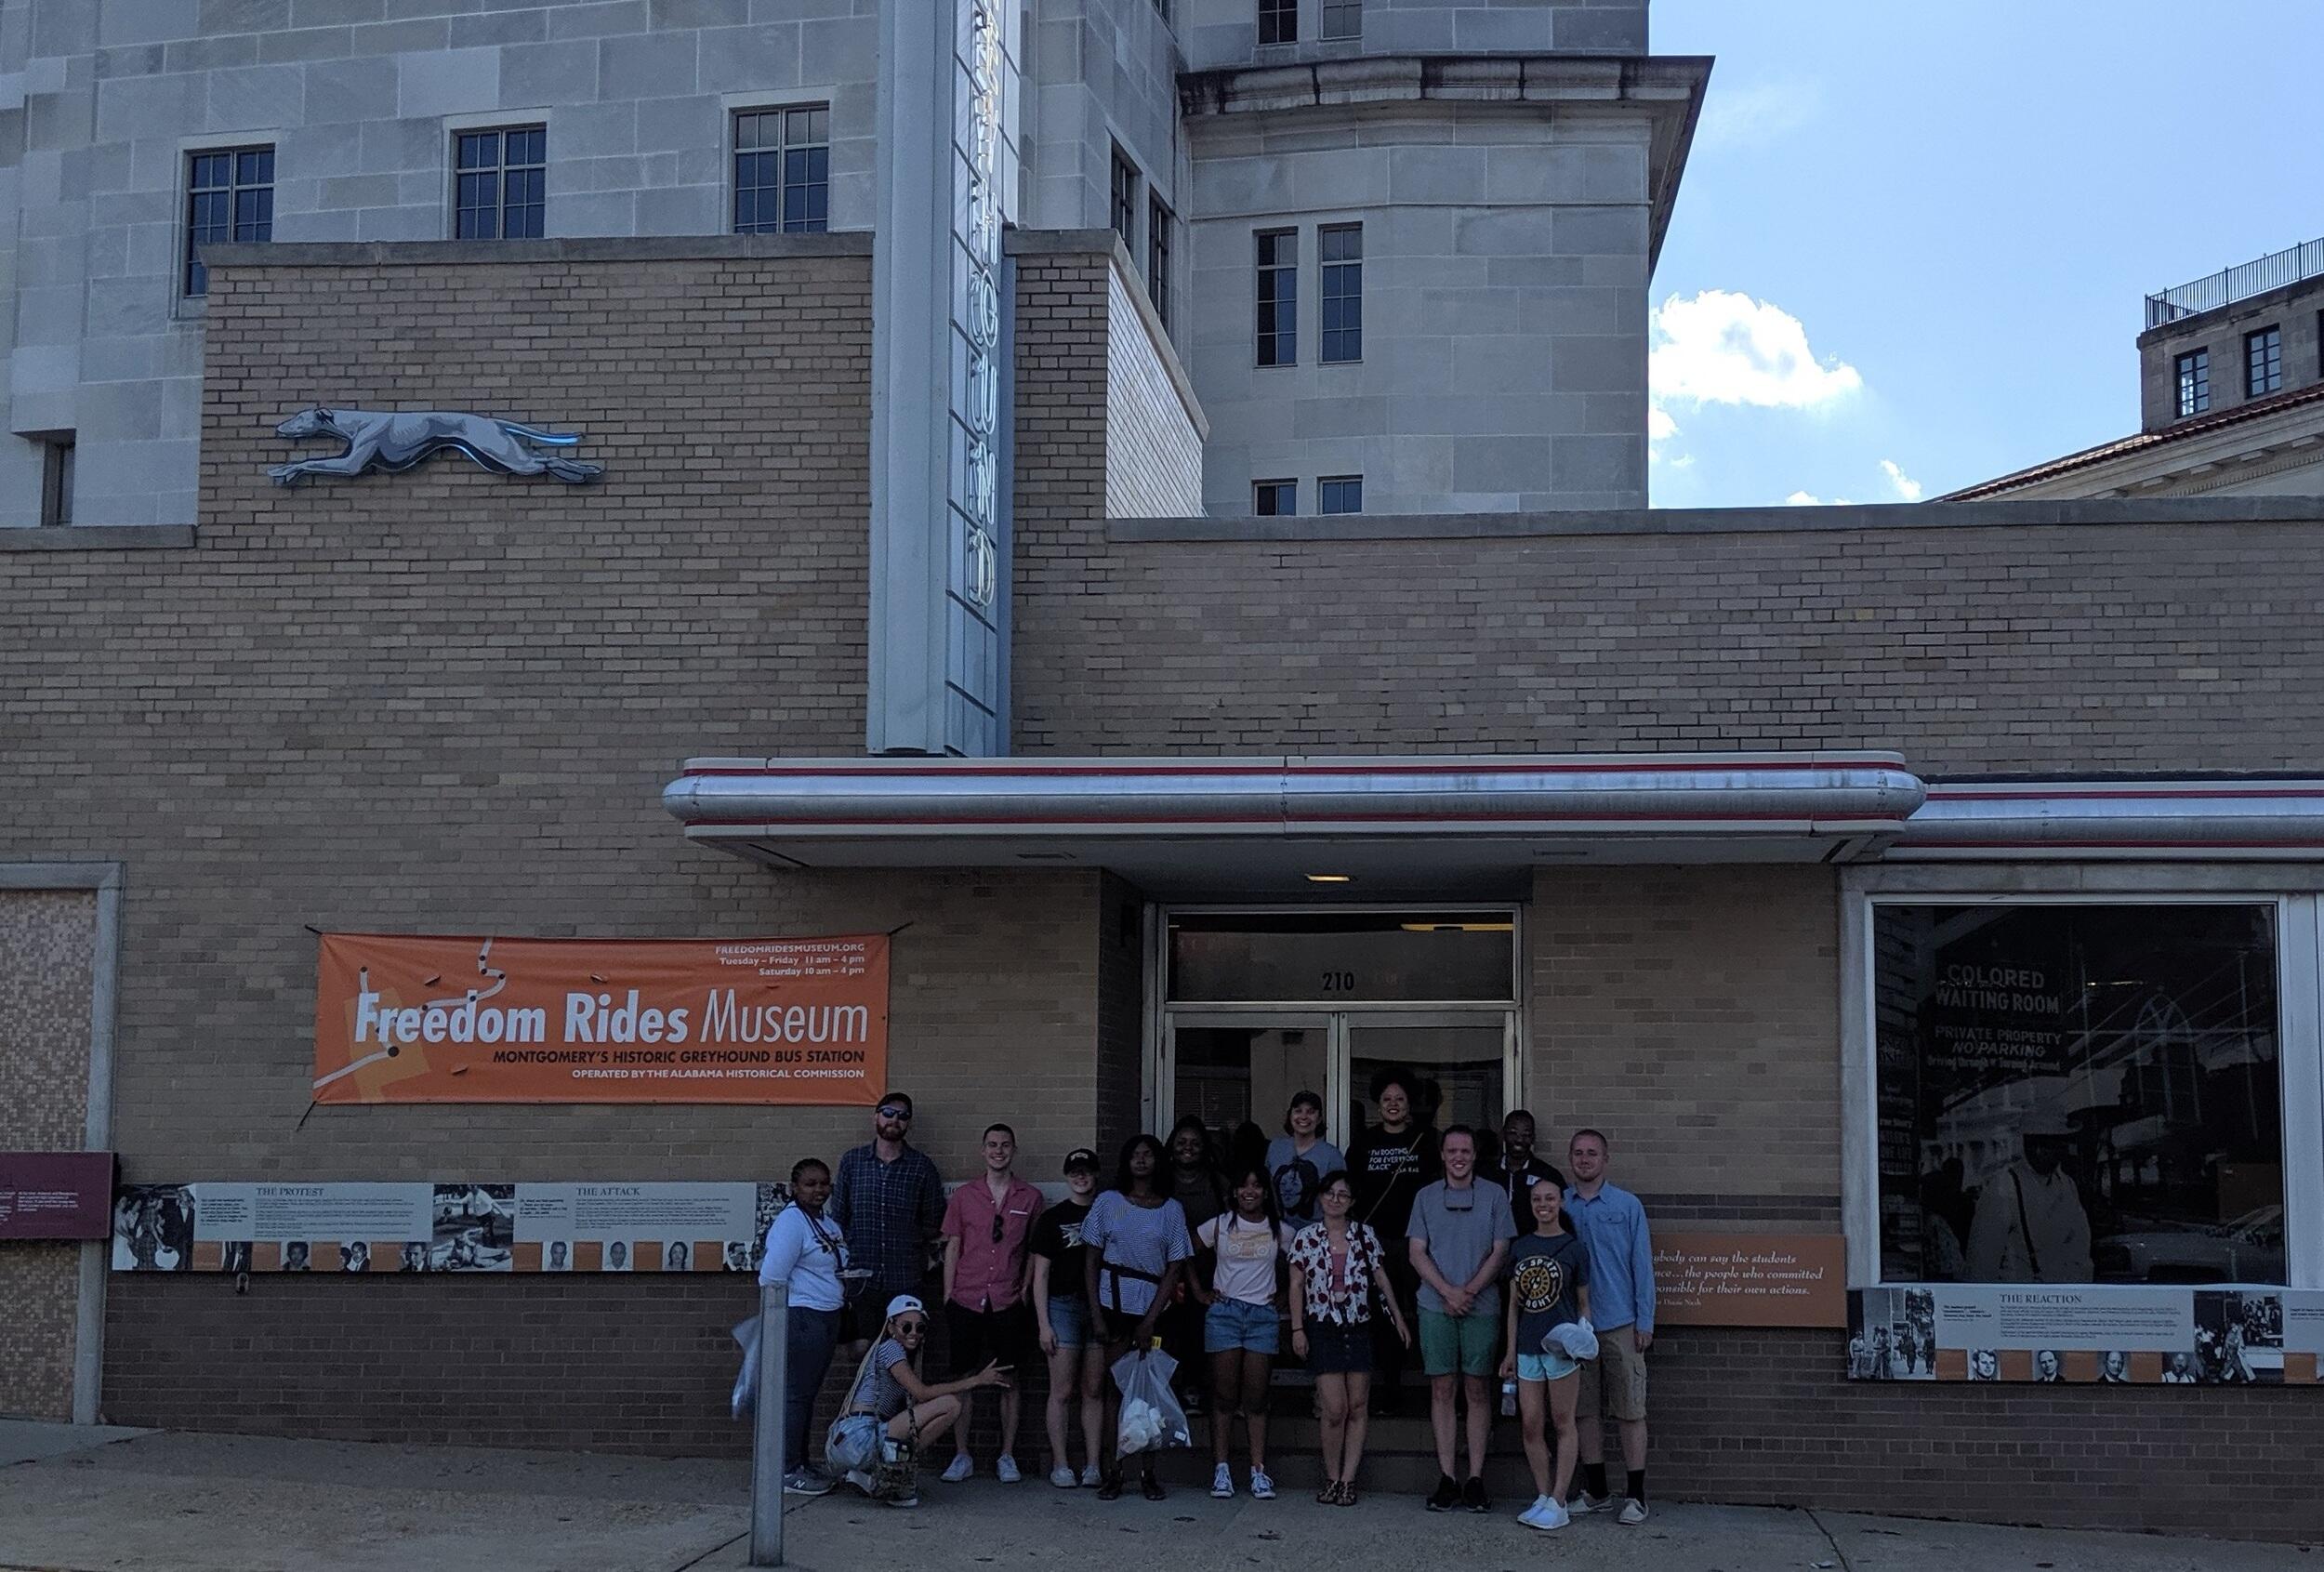 VCU students standing in front of the Freedom Rides Museum, a brick building, in Montgomery, Alabama.